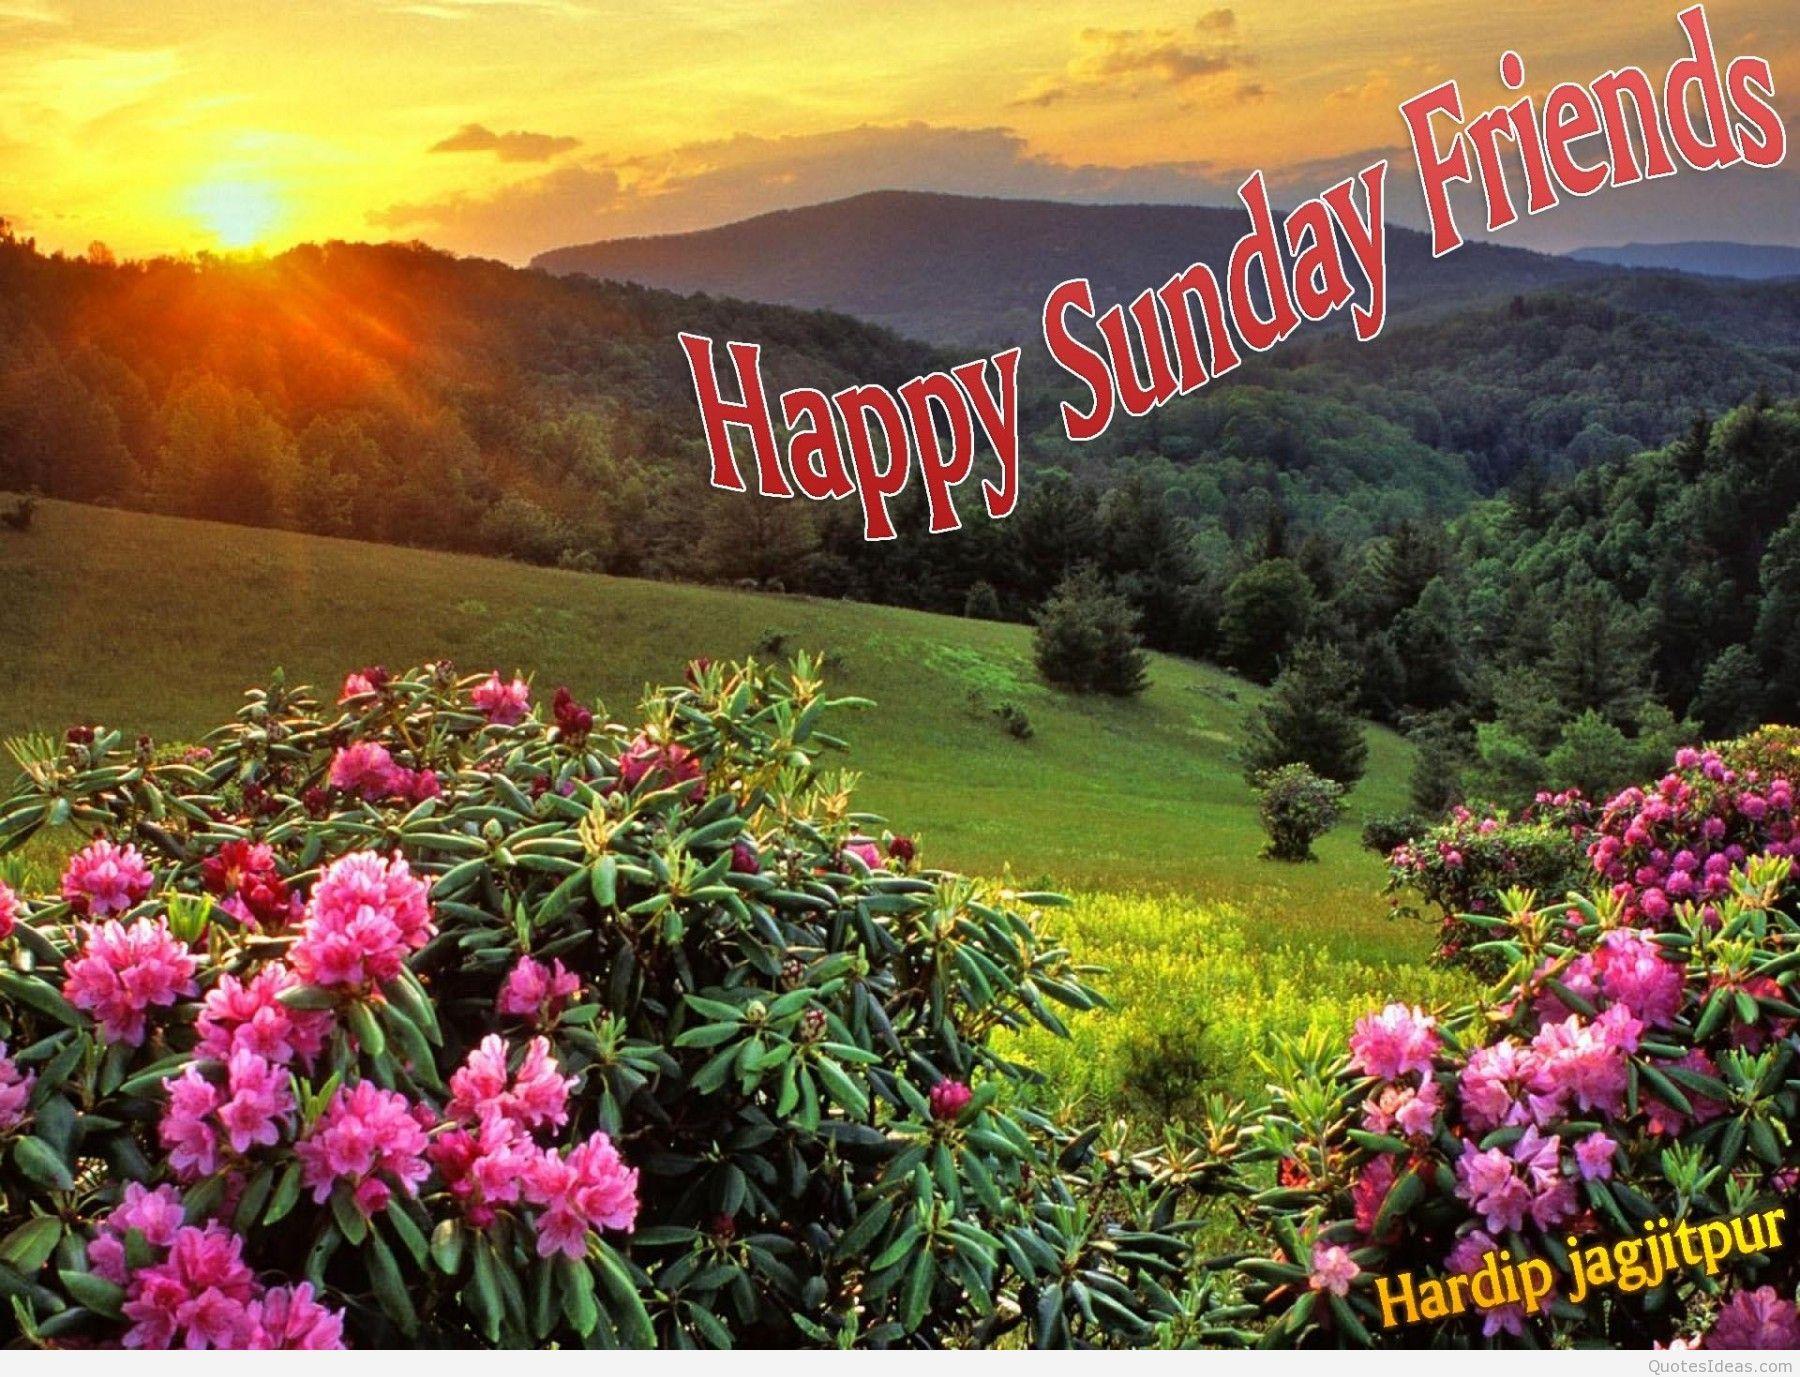 Happy Sunday Wallpaper Download (Picture)